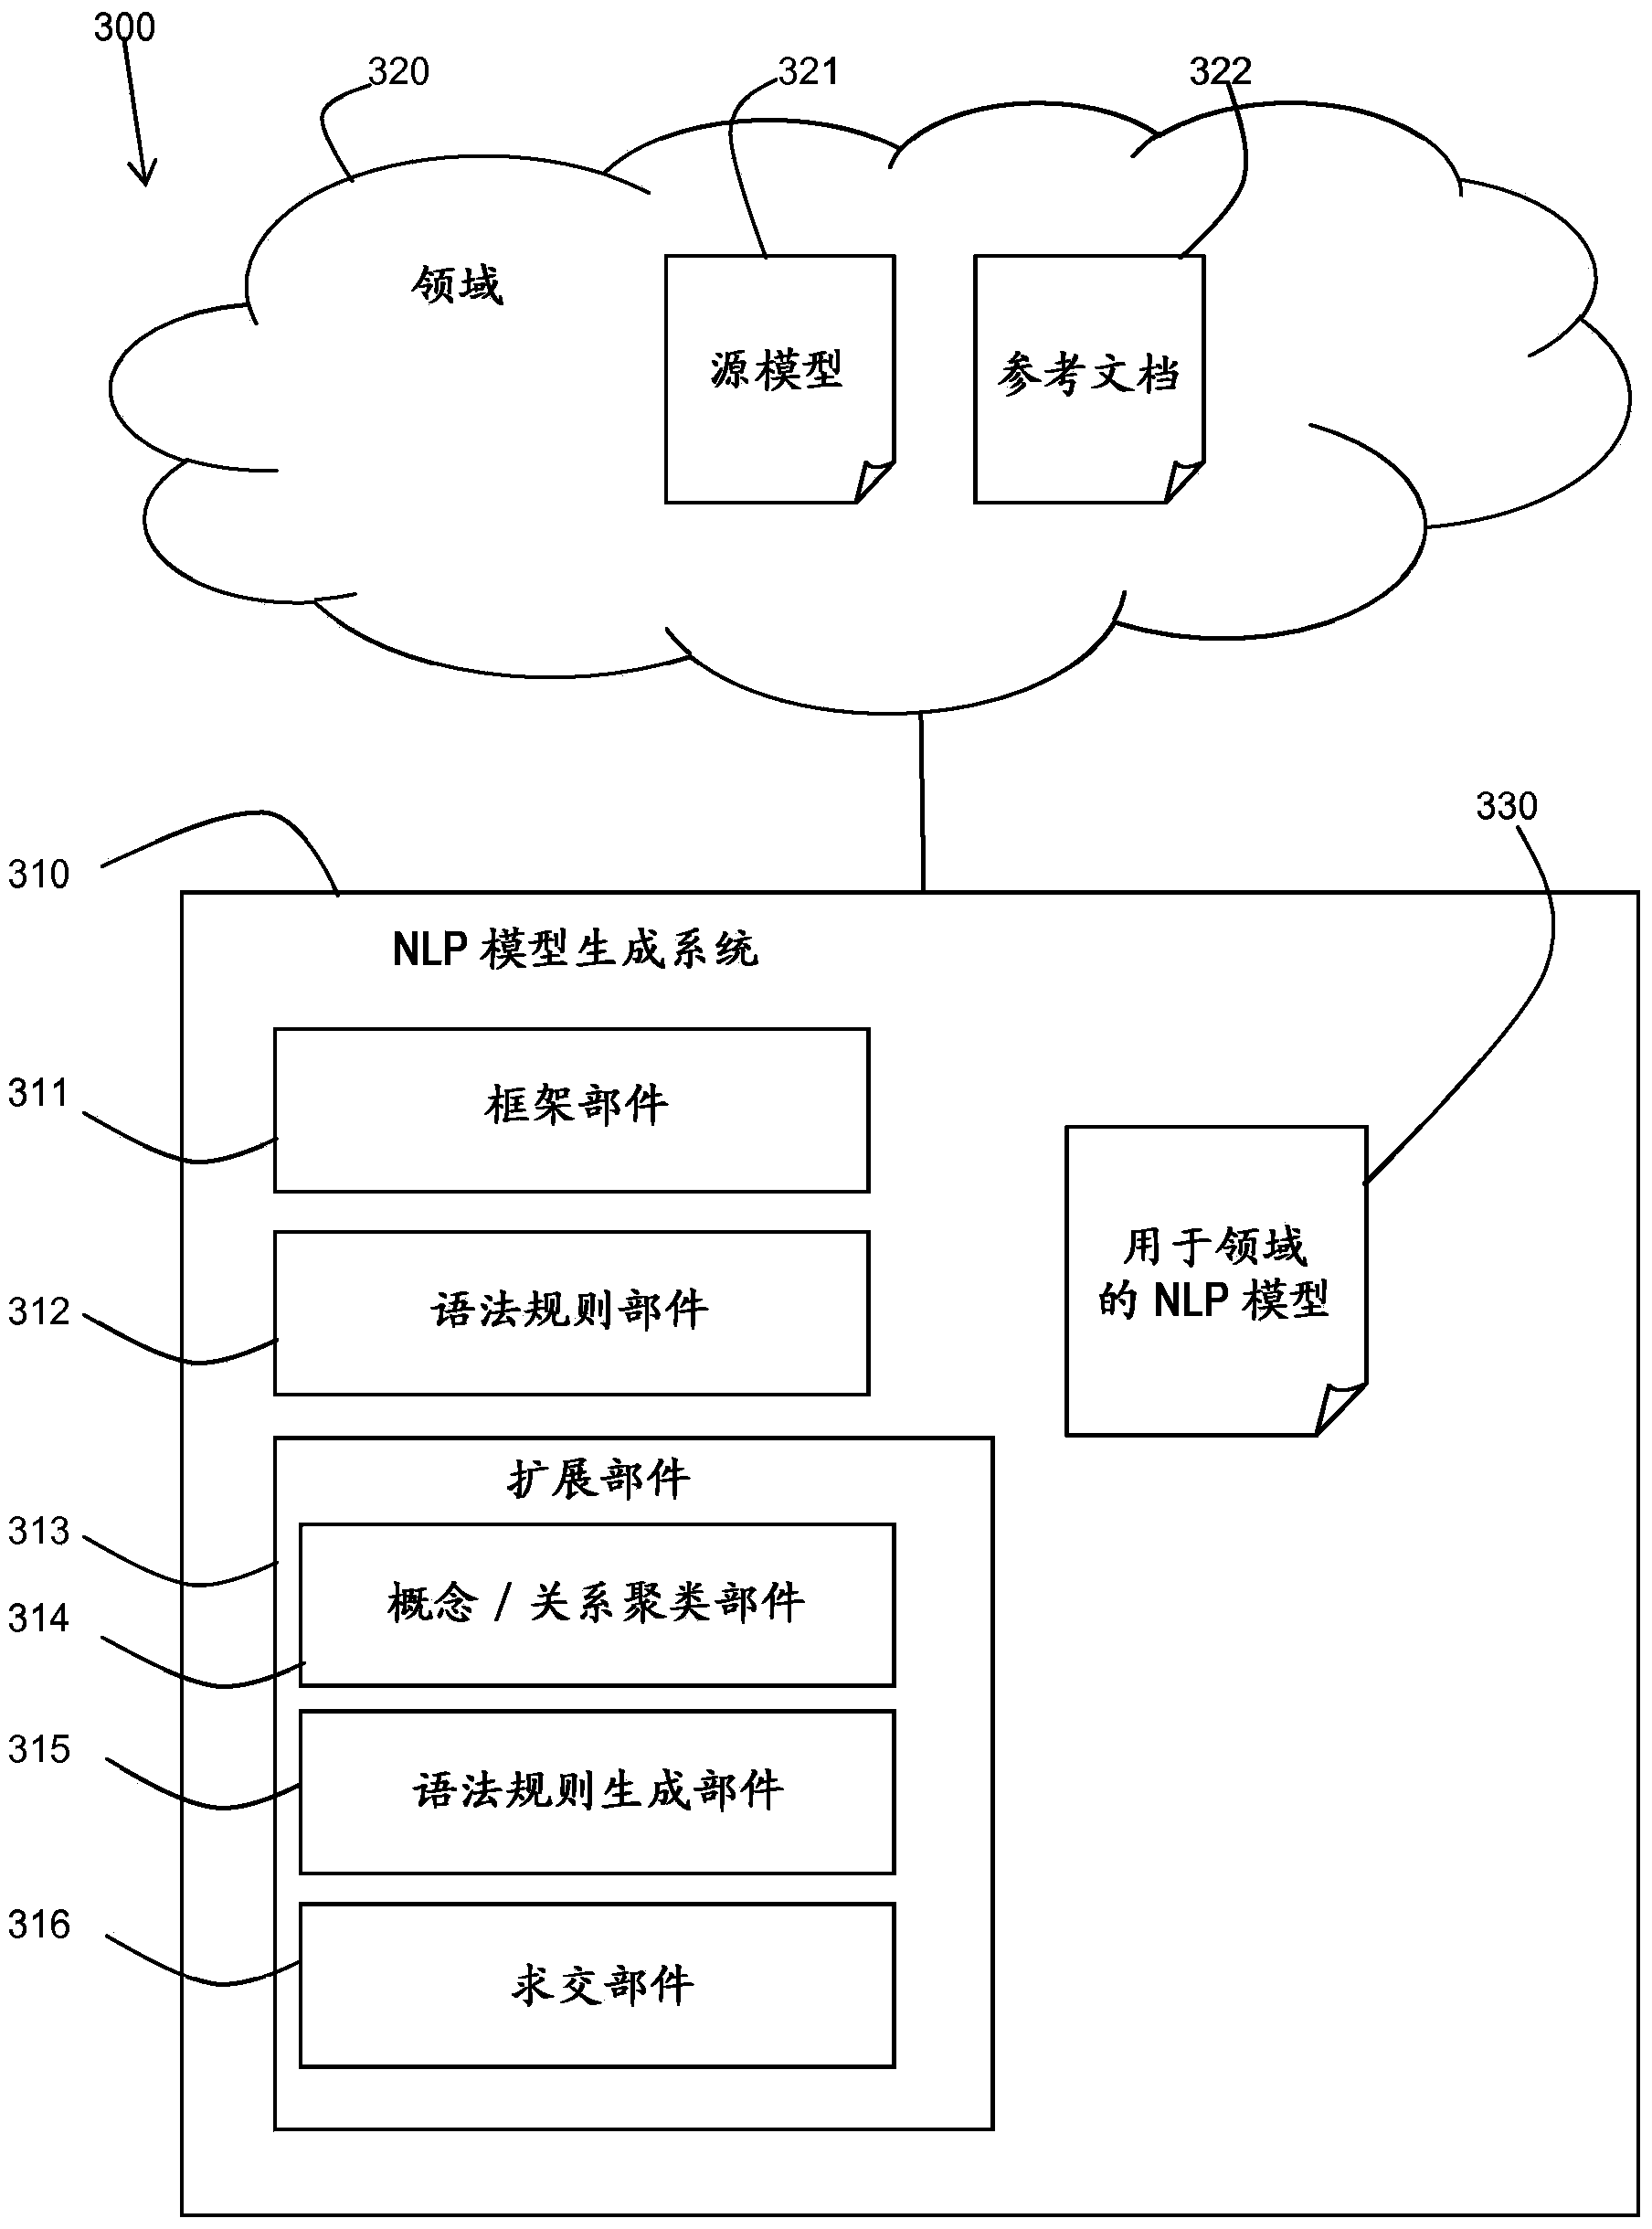 Generation of natural language processing model for information domain